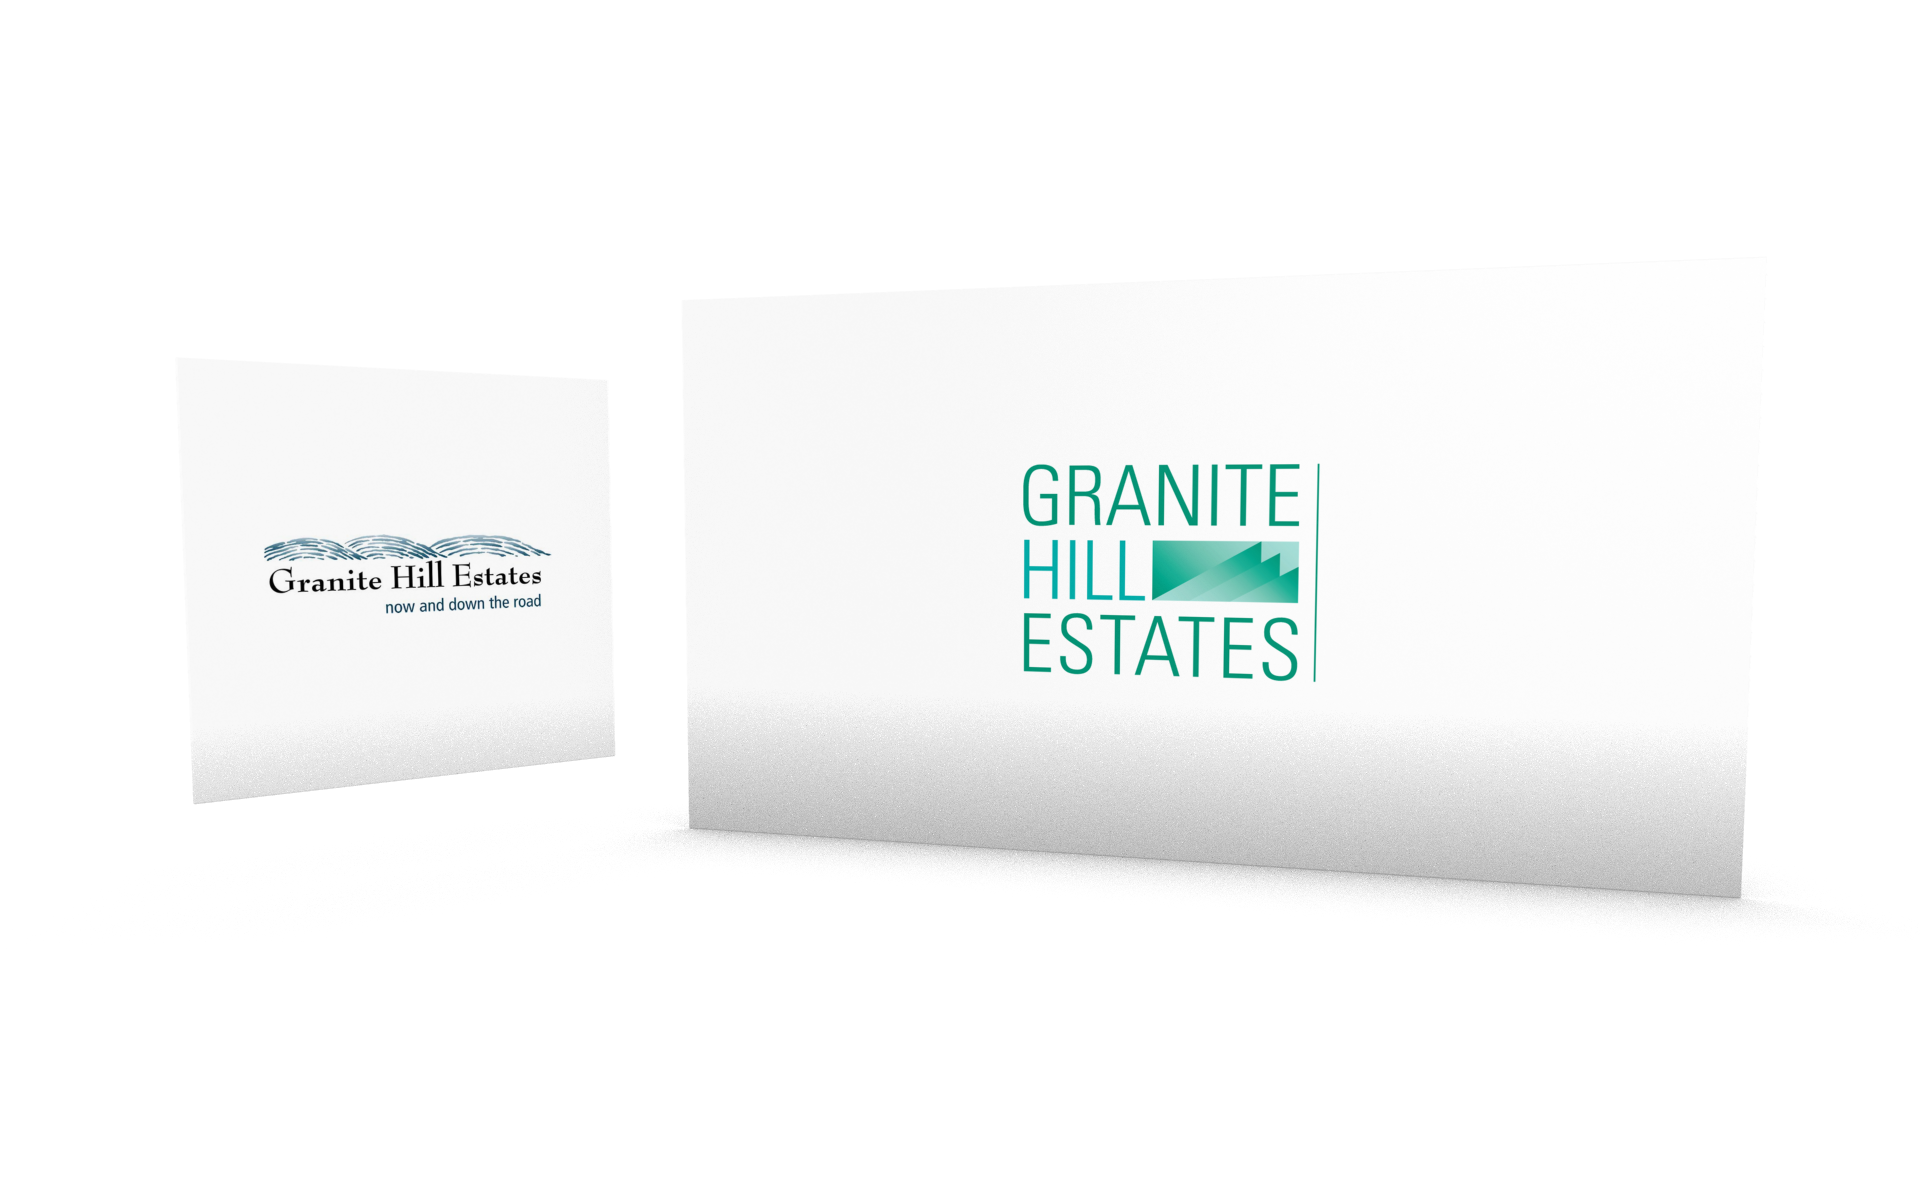 Granite Hill Estates Identity: Before and After